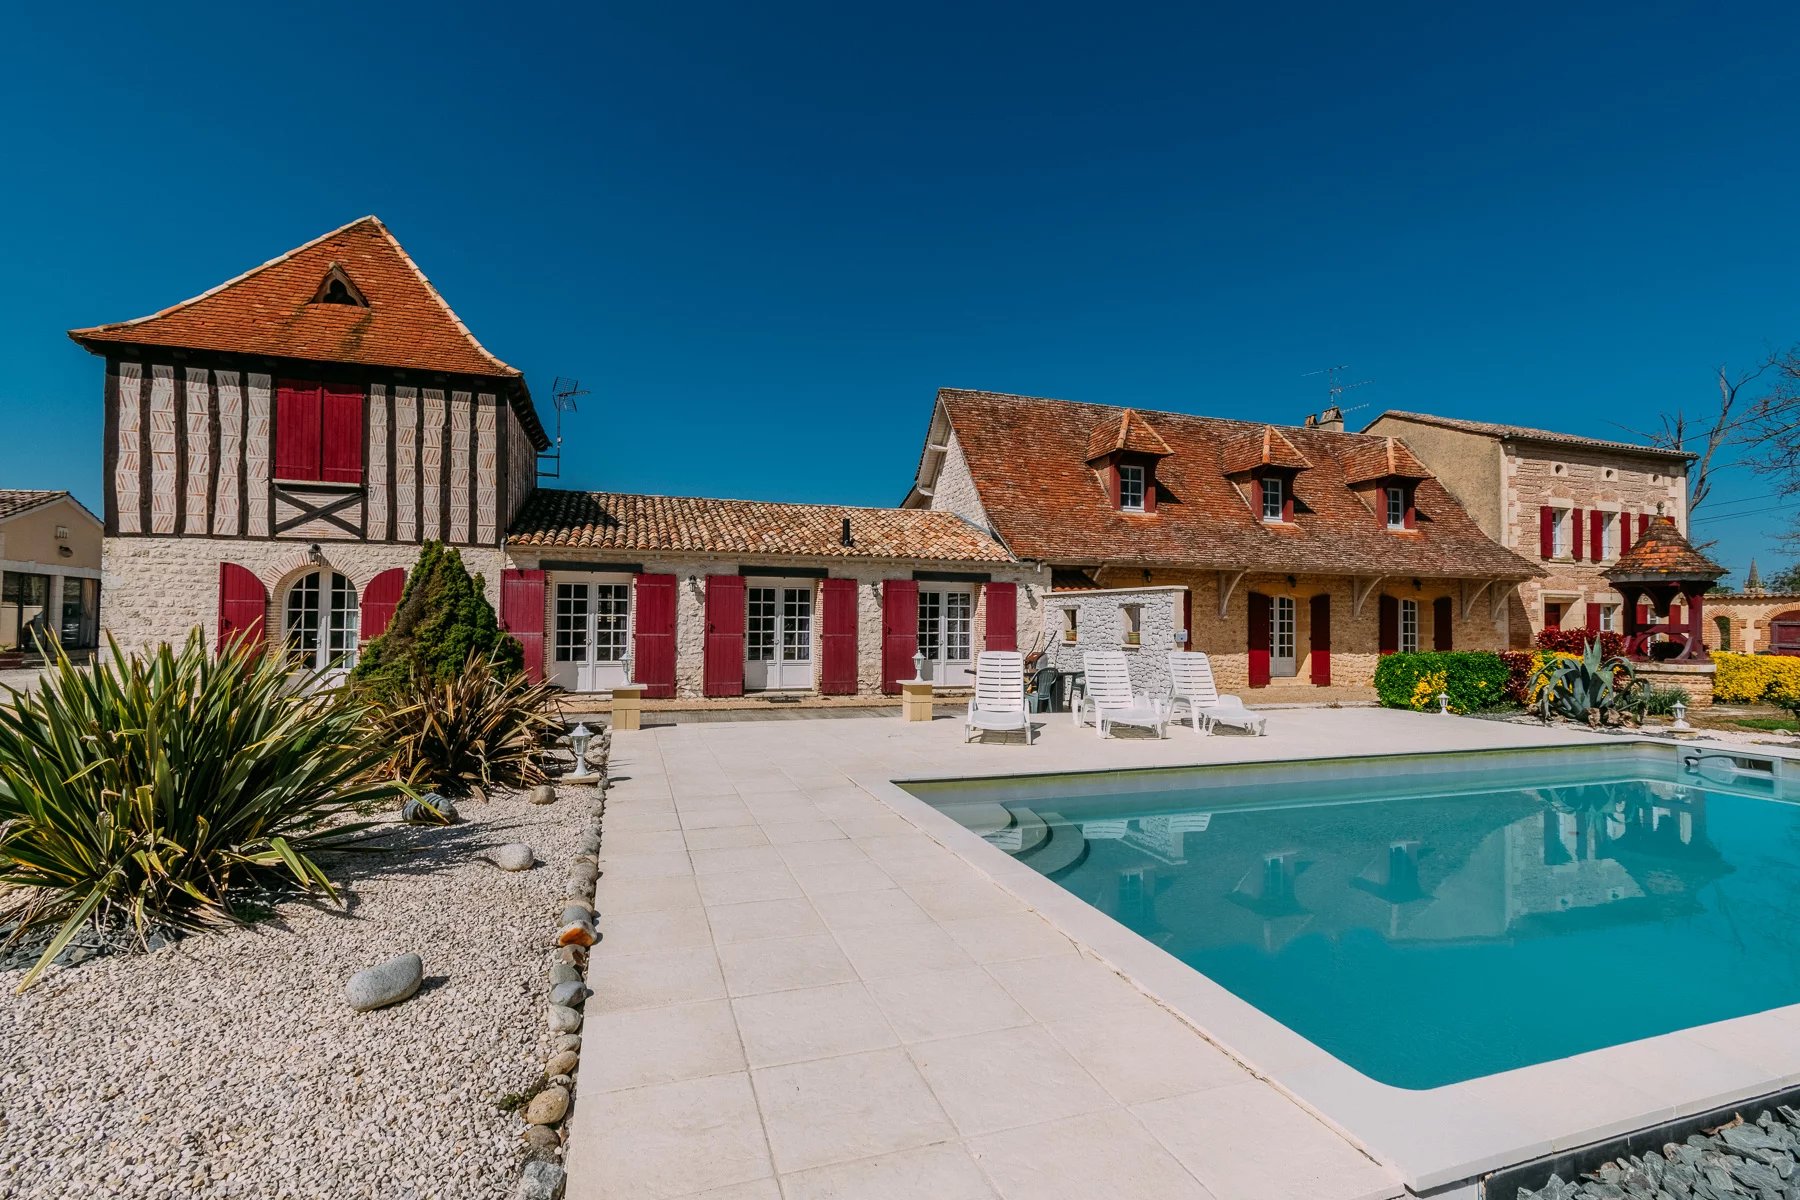 Unique manor house dating back to the 18th Century with guest annexe and 2 gites